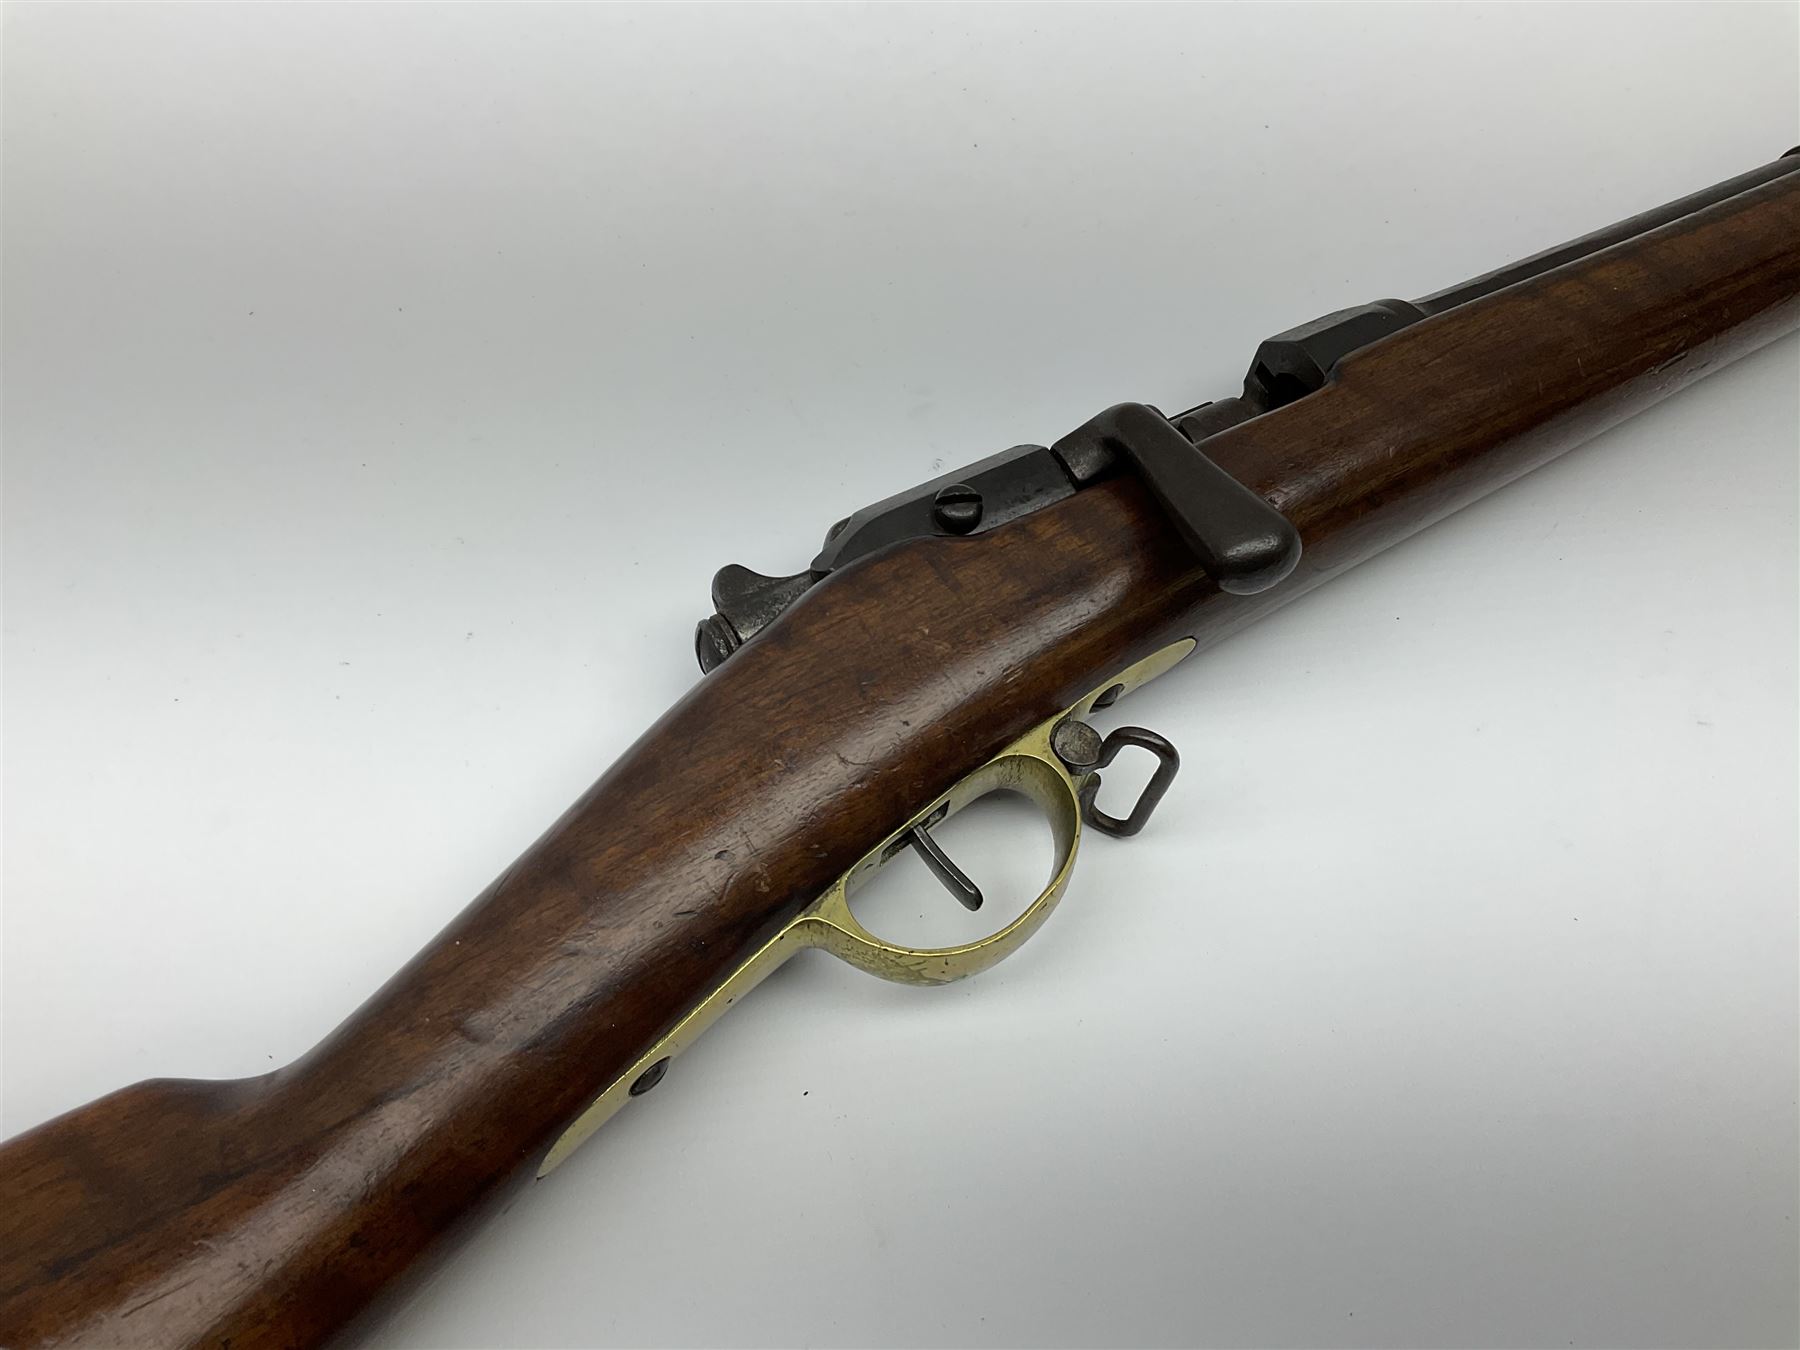 French Model 1866 Chassepot 11mm bolt-action needle fire rifle - Image 6 of 9